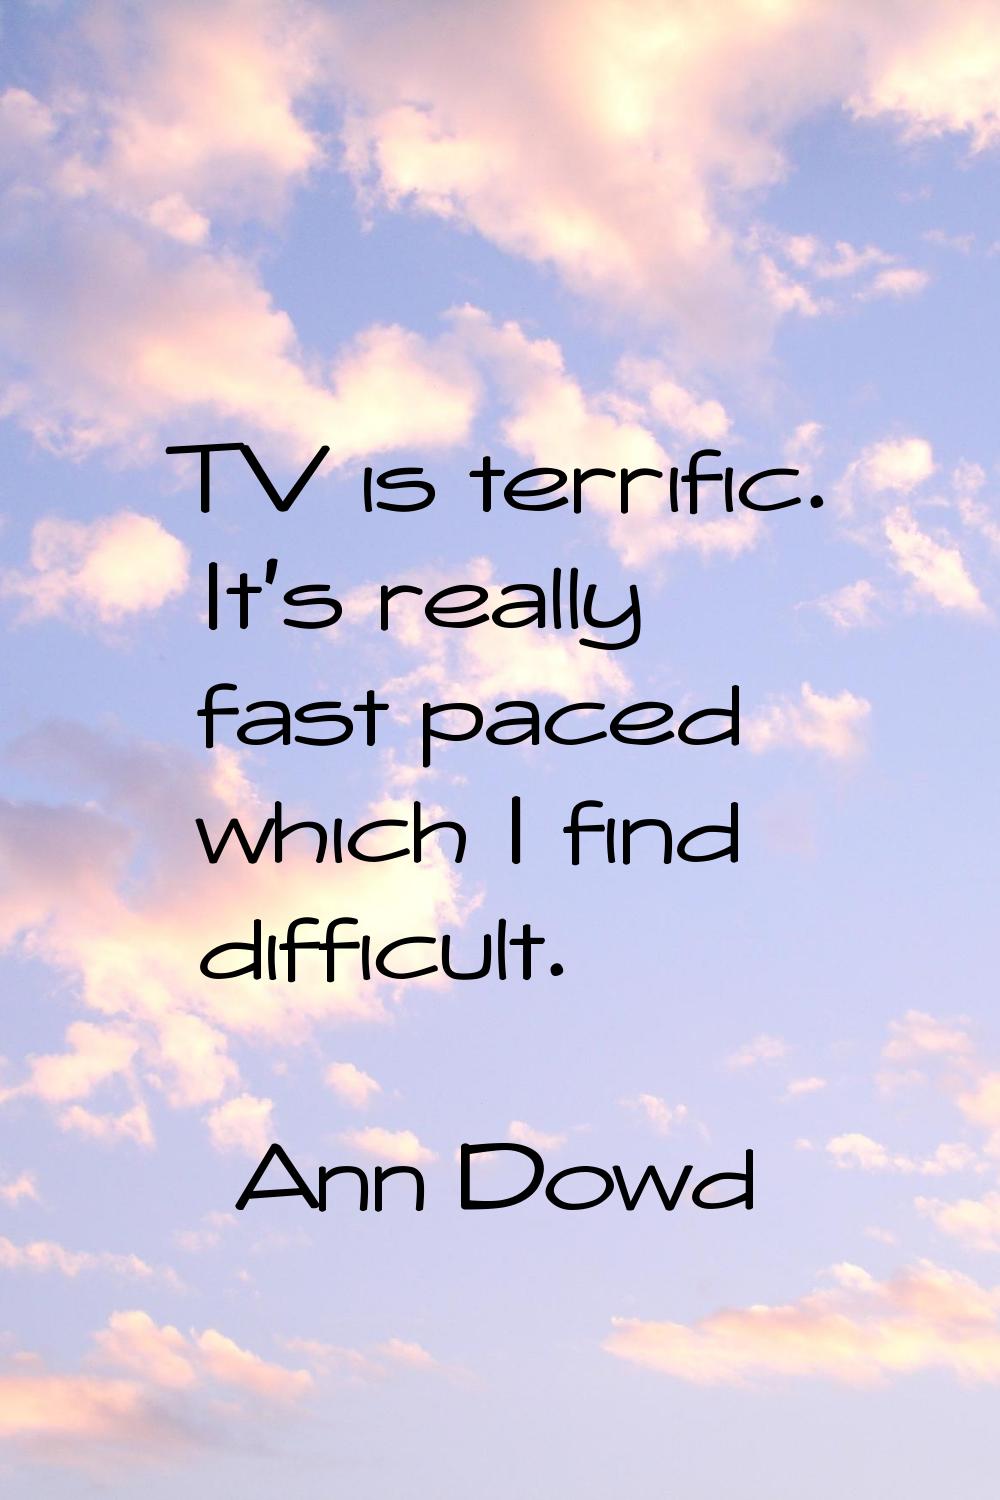 TV is terrific. It's really fast paced which I find difficult.